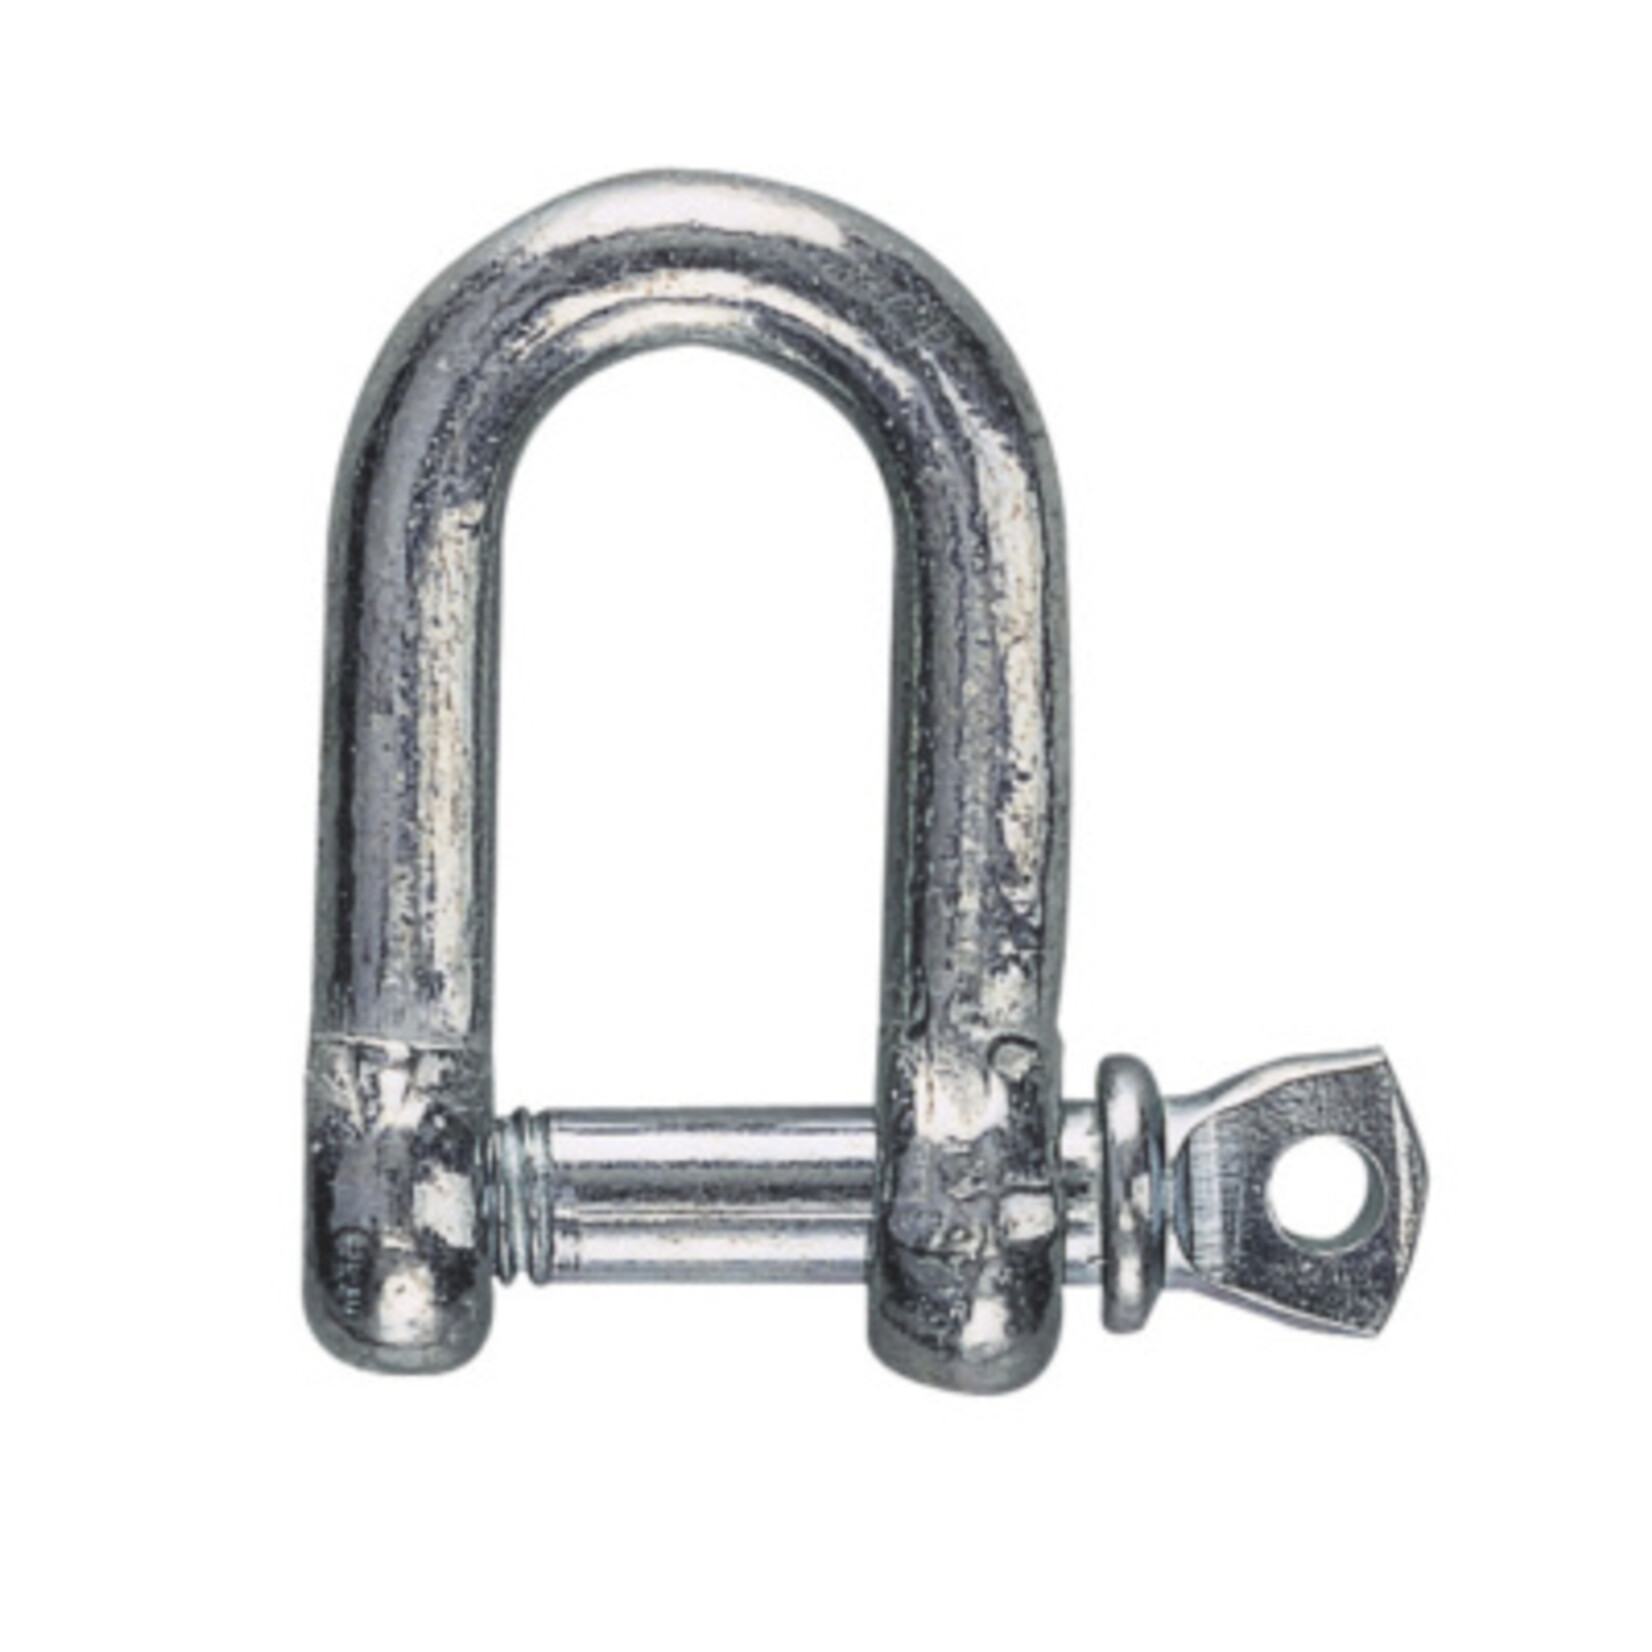 Plastimo Shackle gal d-shap dia 14mm yellow code